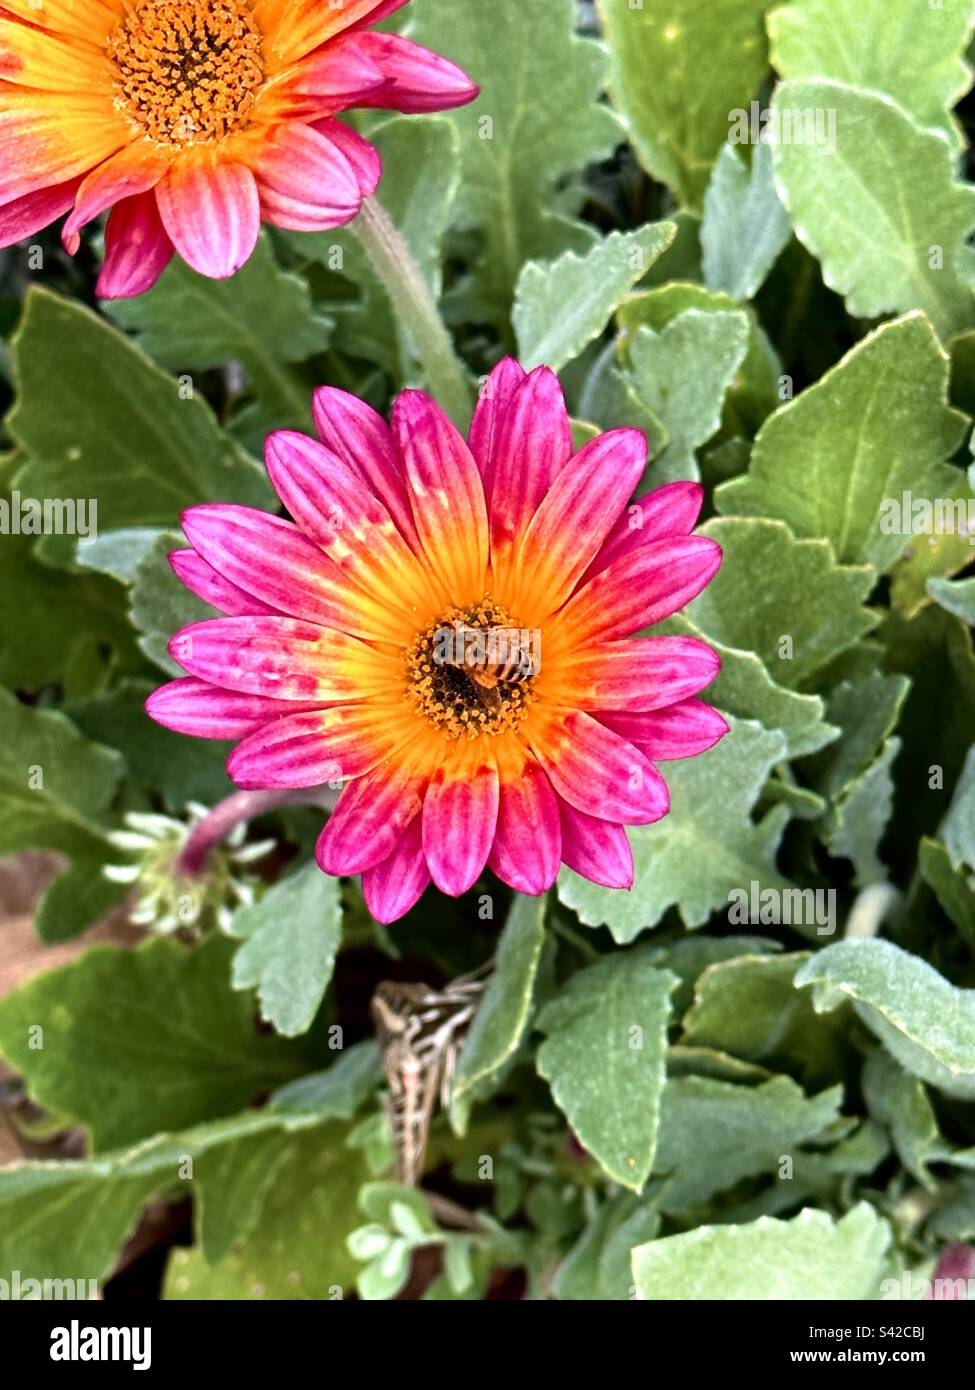 A honey bee (Apis), already loaded with pollen, forages for more at the center of an African daisy (Arctotis) at Huntington Central Park in Huntington Beach, California. Stock Photo